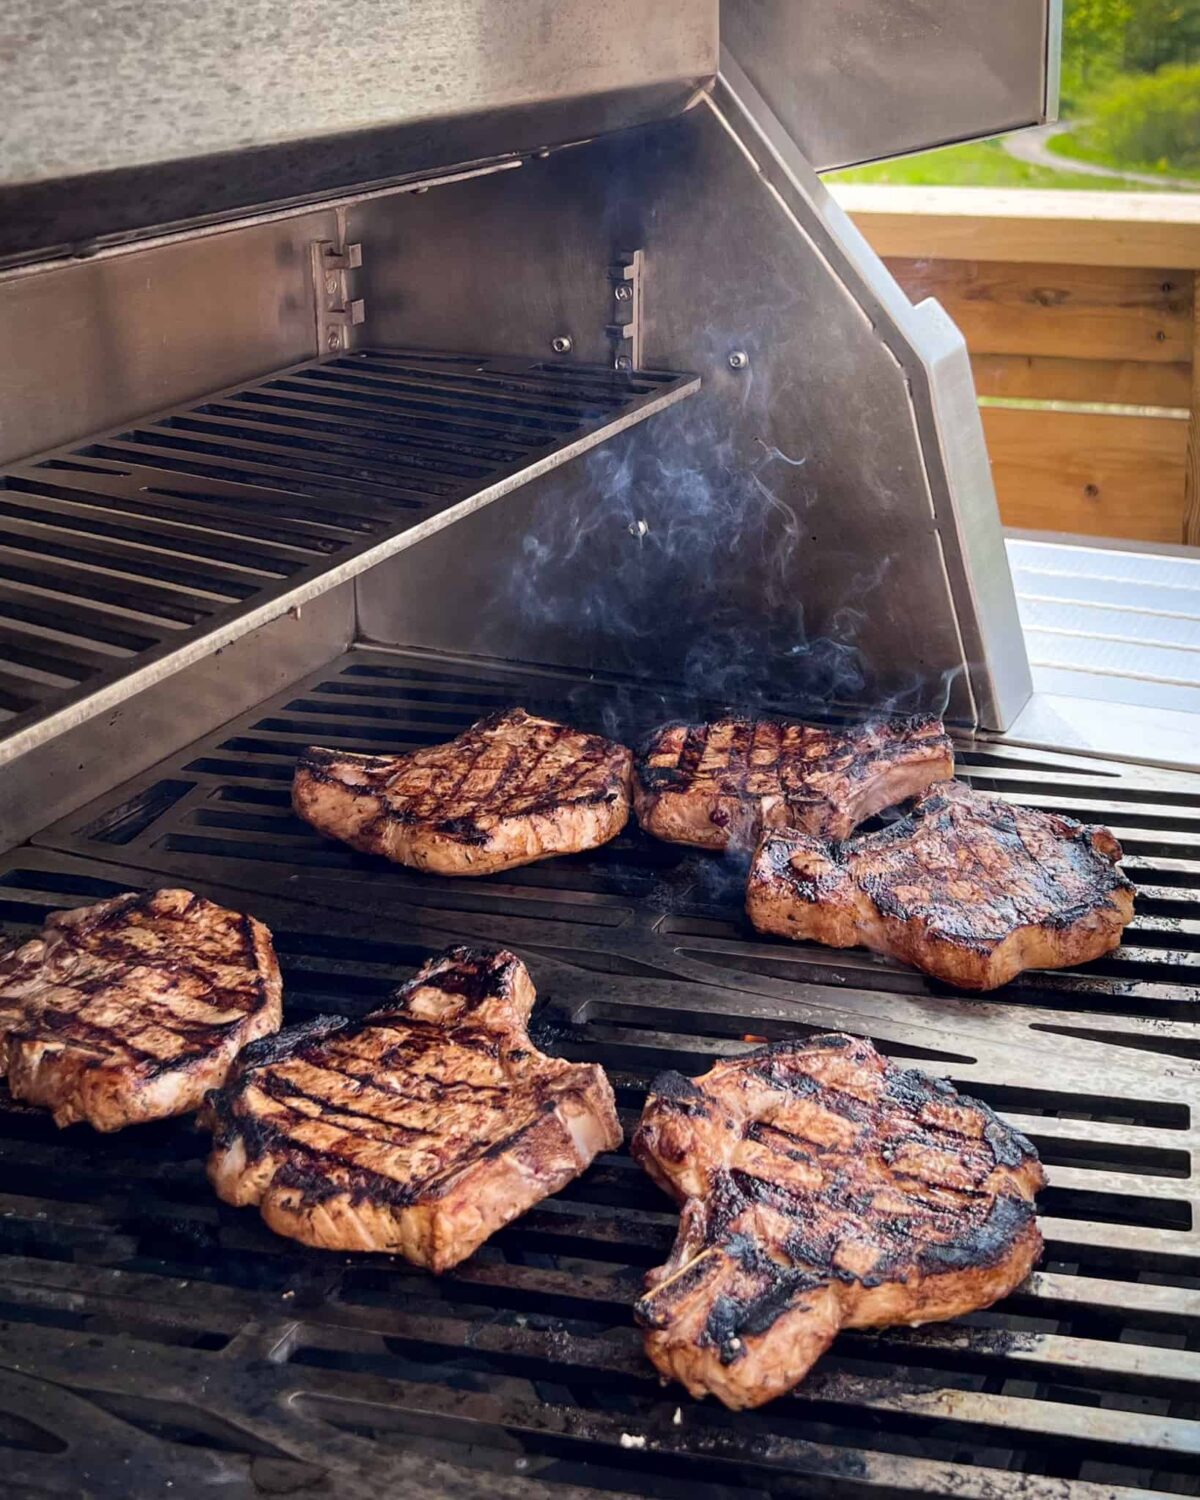 Six pork chops on the grill with beautiful grill marks.